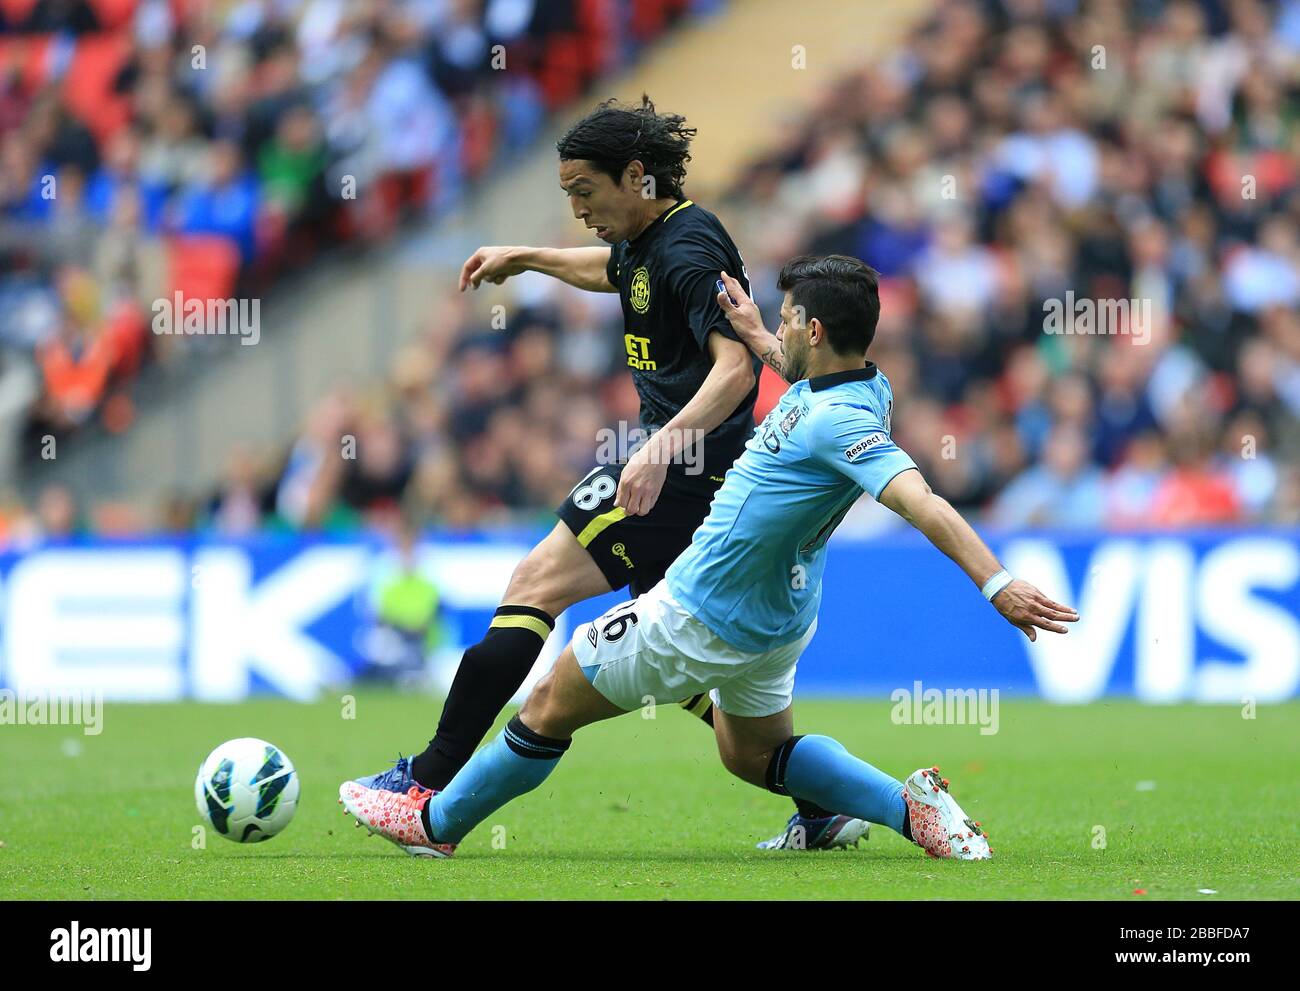 Wigan Athletic's Roger Espinoza (left) and Manchester City's Sergio Aguero (right) battle for the ball Stock Photo